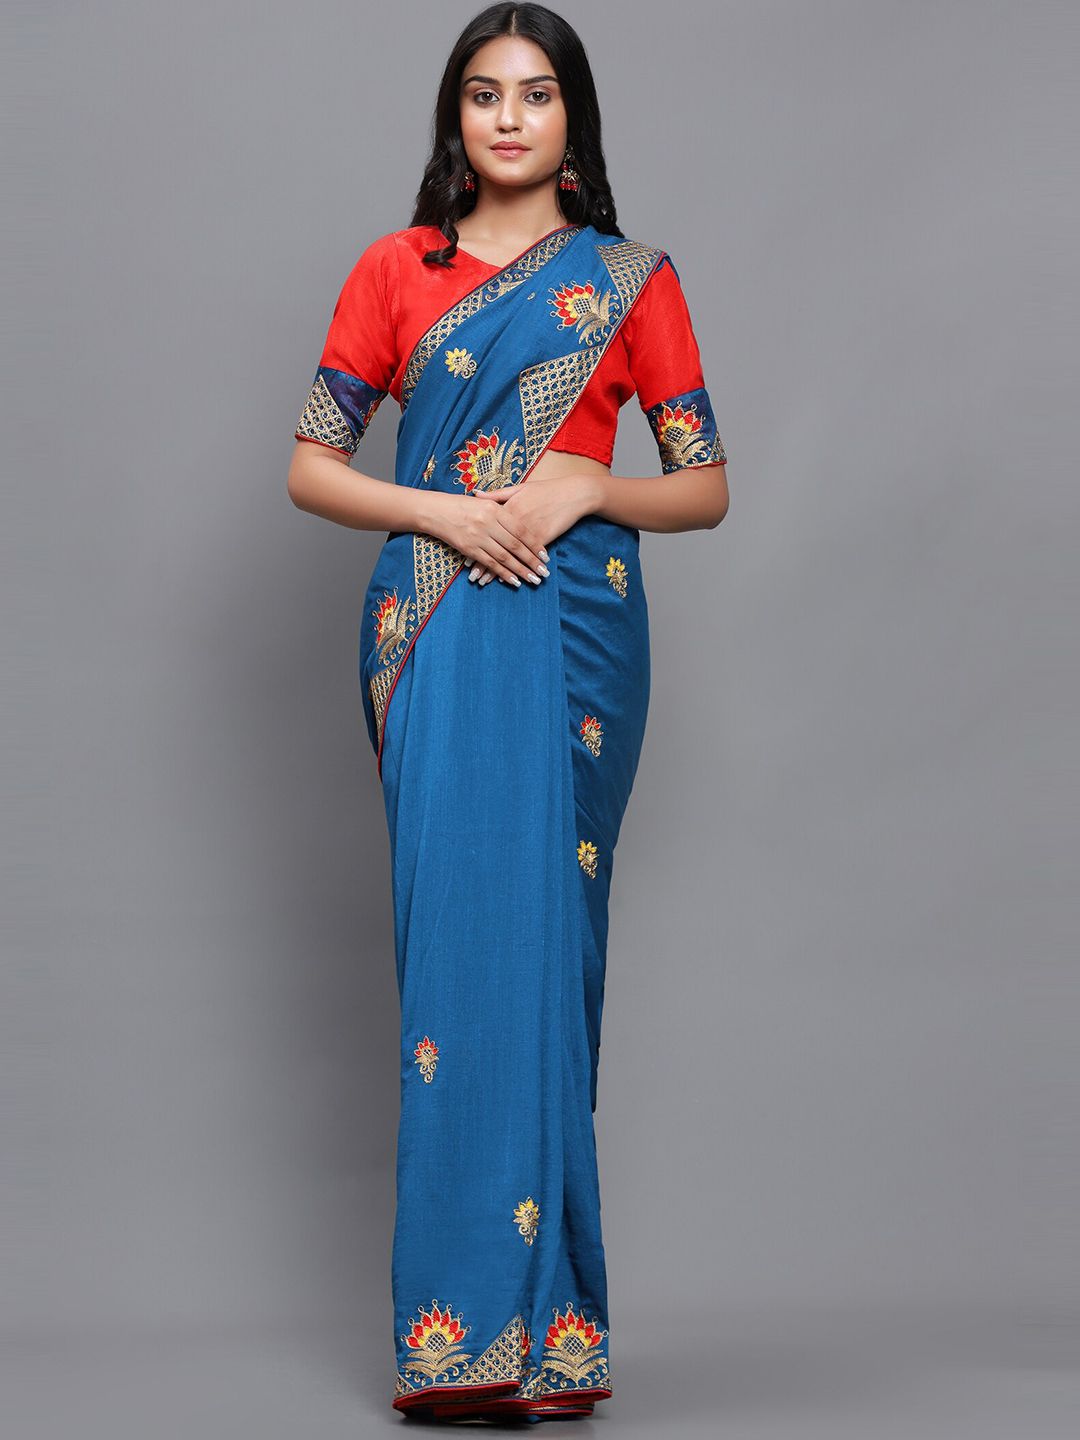 3BUDDY FASHION Turquoise Blue & Red Floral Embroidered Jute Silk Venkatgiri Saree Price in India